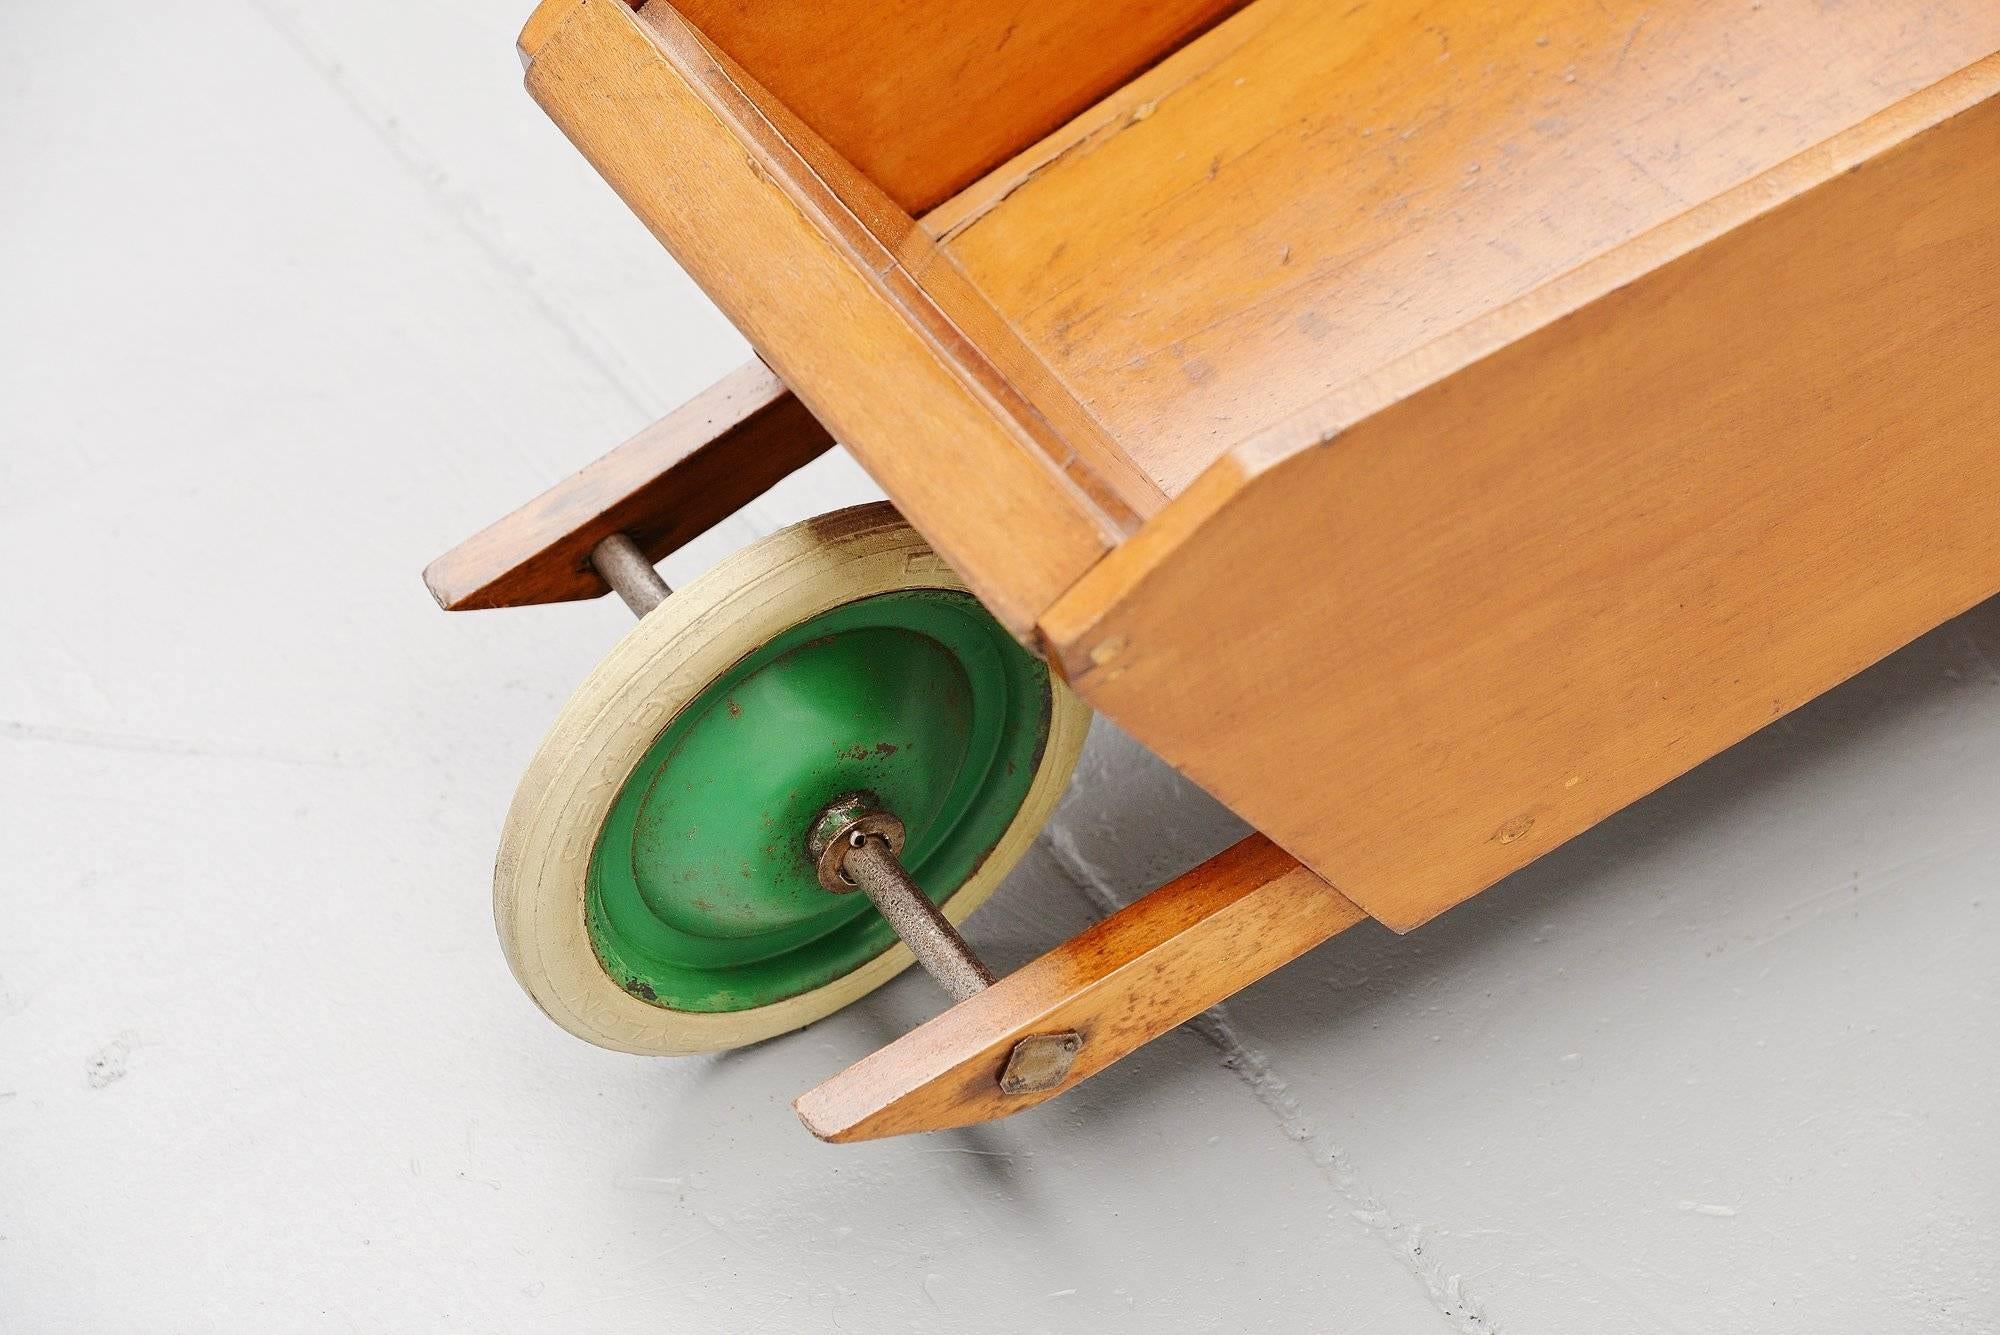 Rare wheelbarrow designed by Ko Verzuu for Ado in circa 1950. Ado means Arbeid door onvolwaardigen, translated; labor by incapacitated, which makes this an even more special piece. Toys by Ado are being highly collected at the moment, even more than